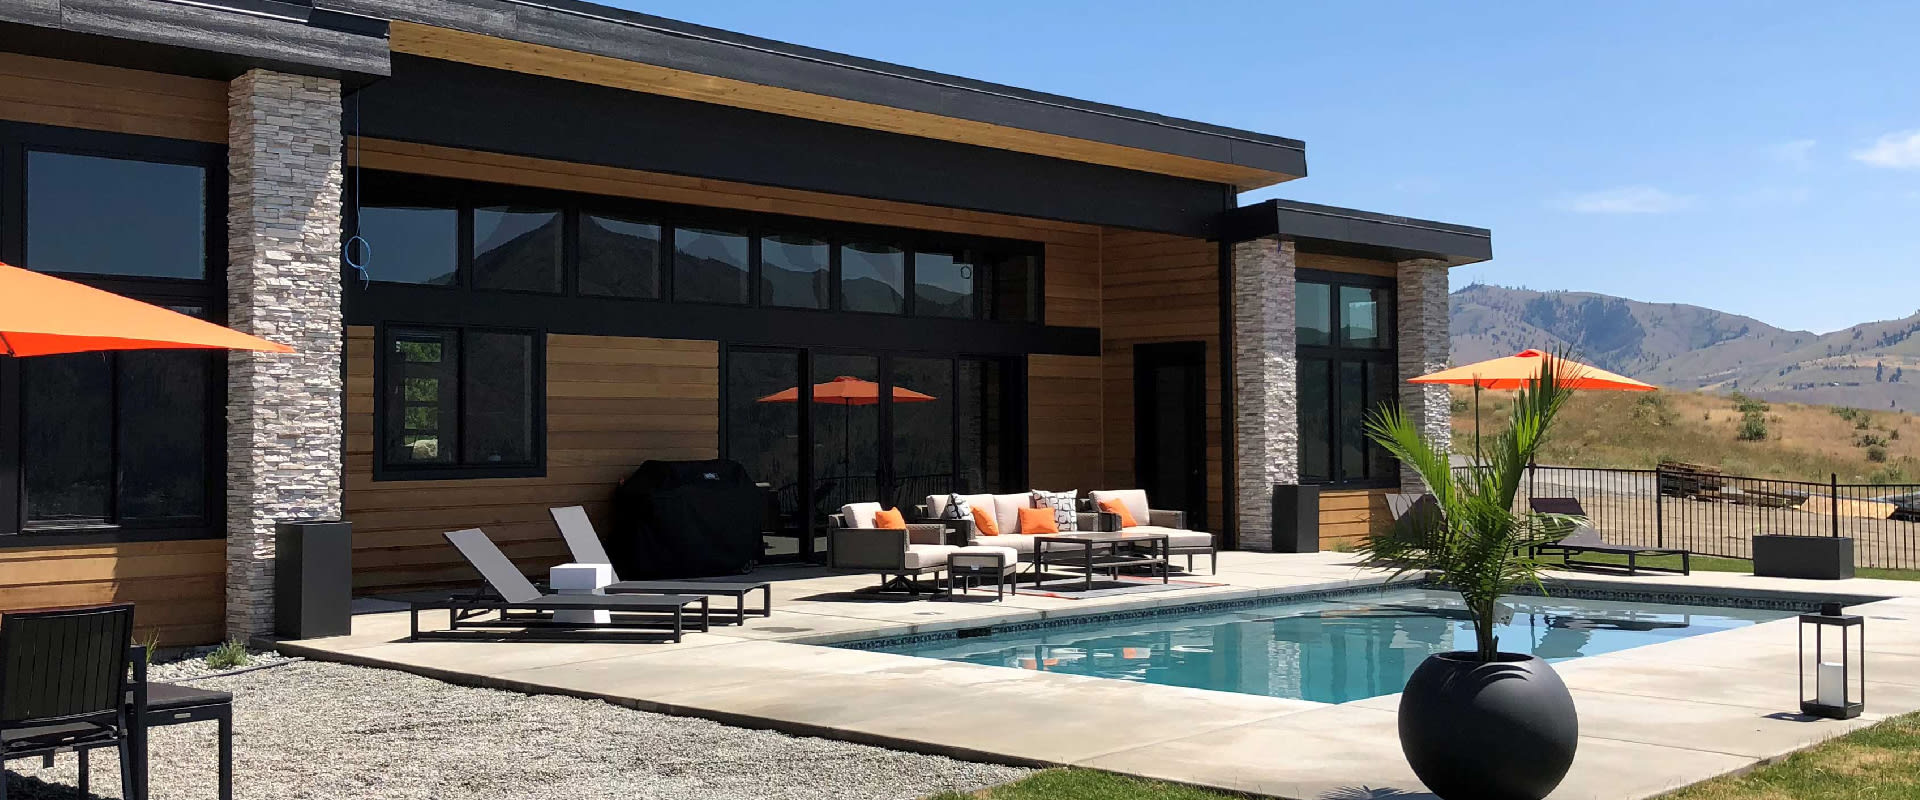 Luxury modern home with a patio and pool surrounded by patio furniture and views of the Cascade Mountains